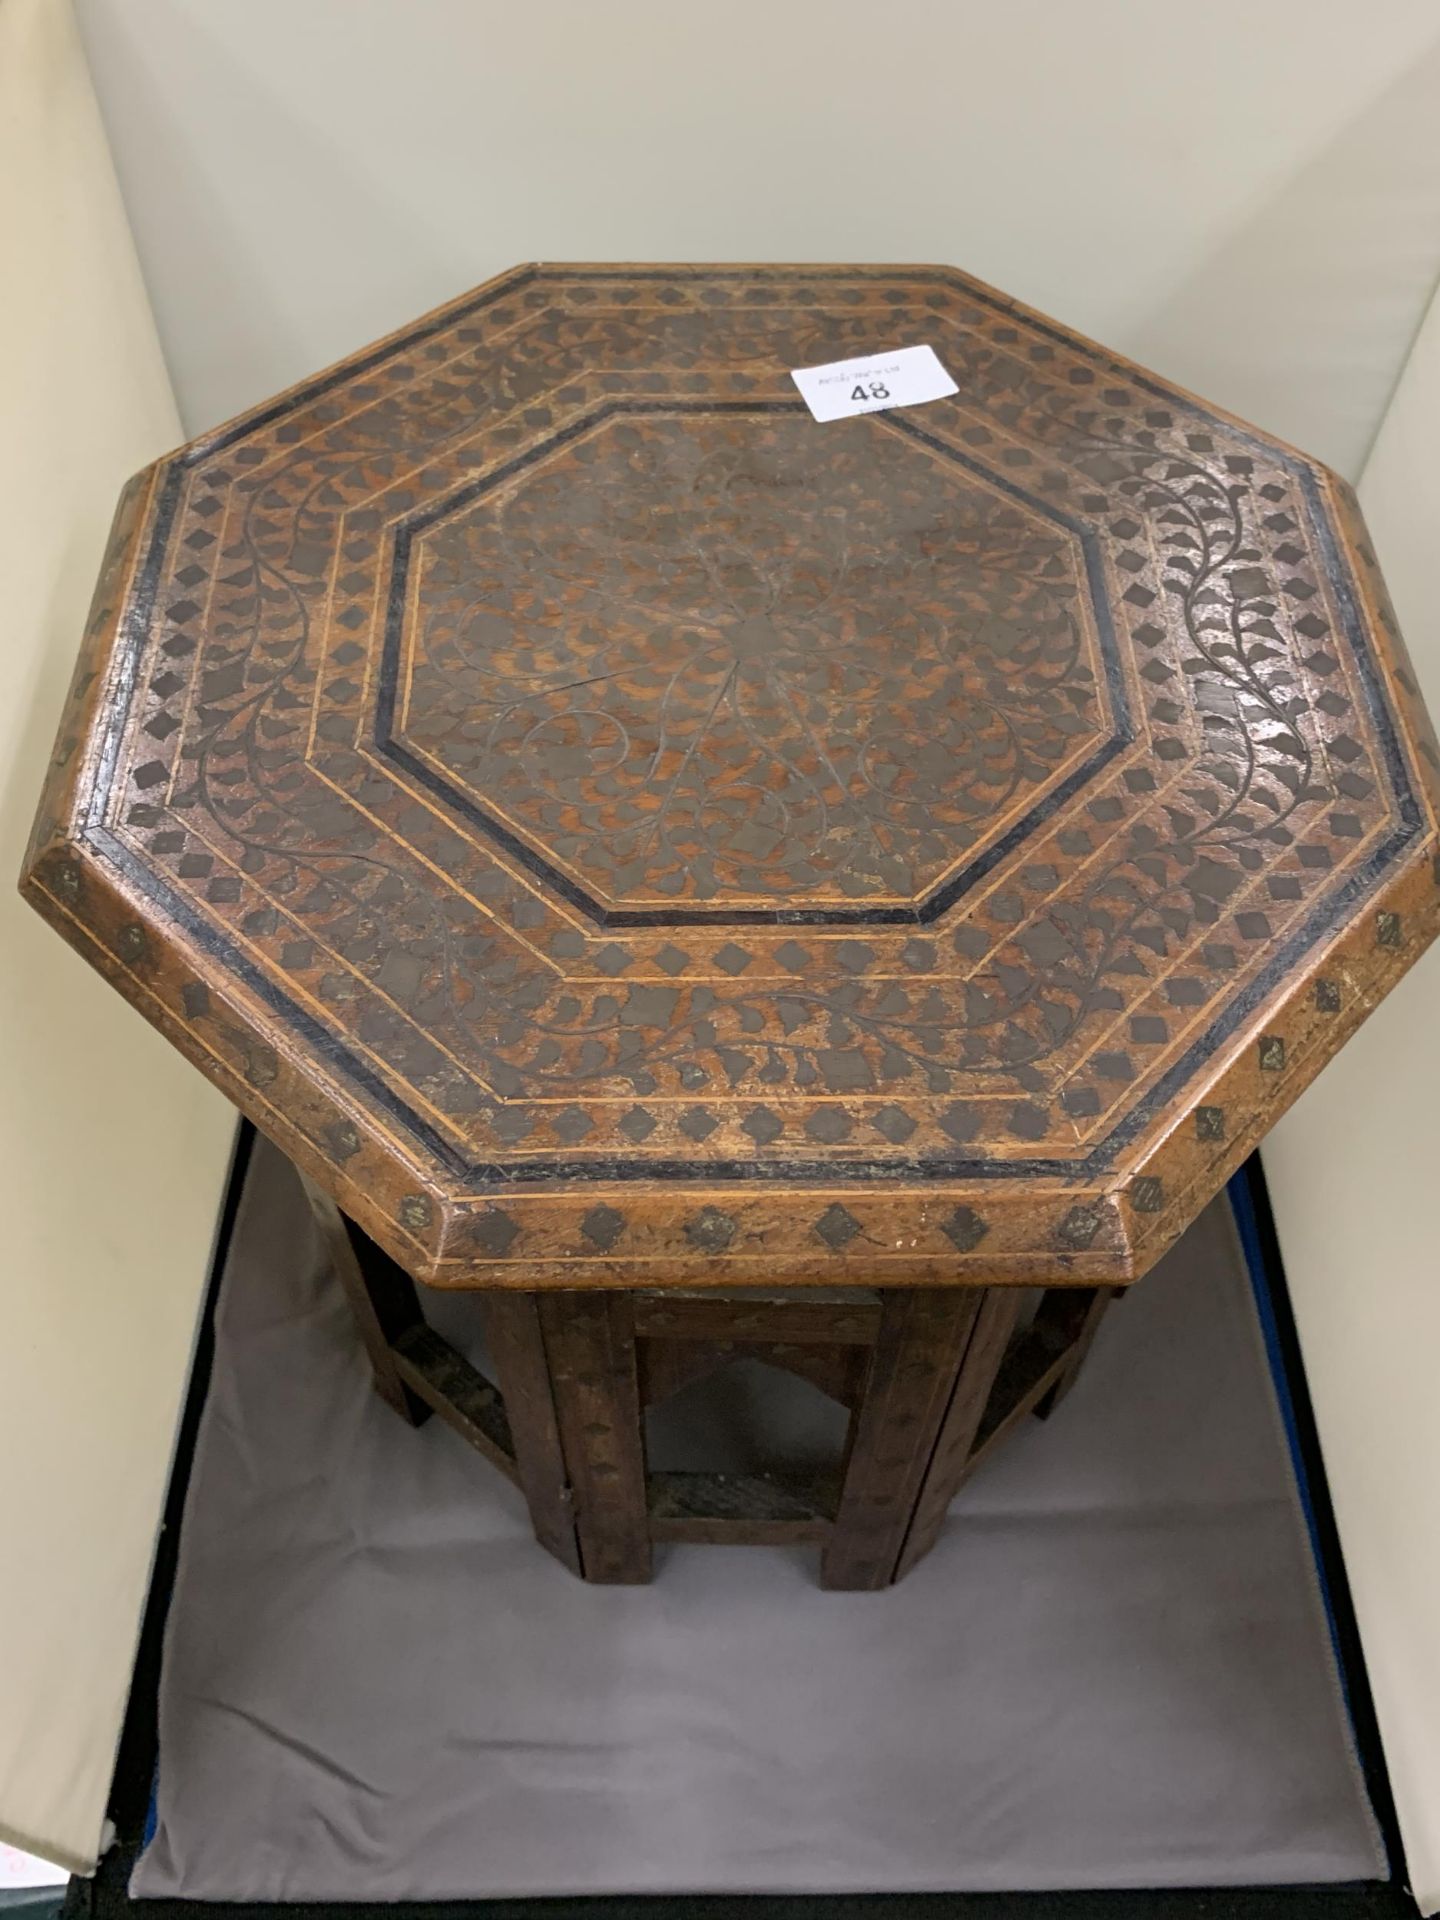 A LATE 19TH CENTURY INDIAN OCTAGONAL TABLE WITH BRASS INLAY - Image 2 of 3